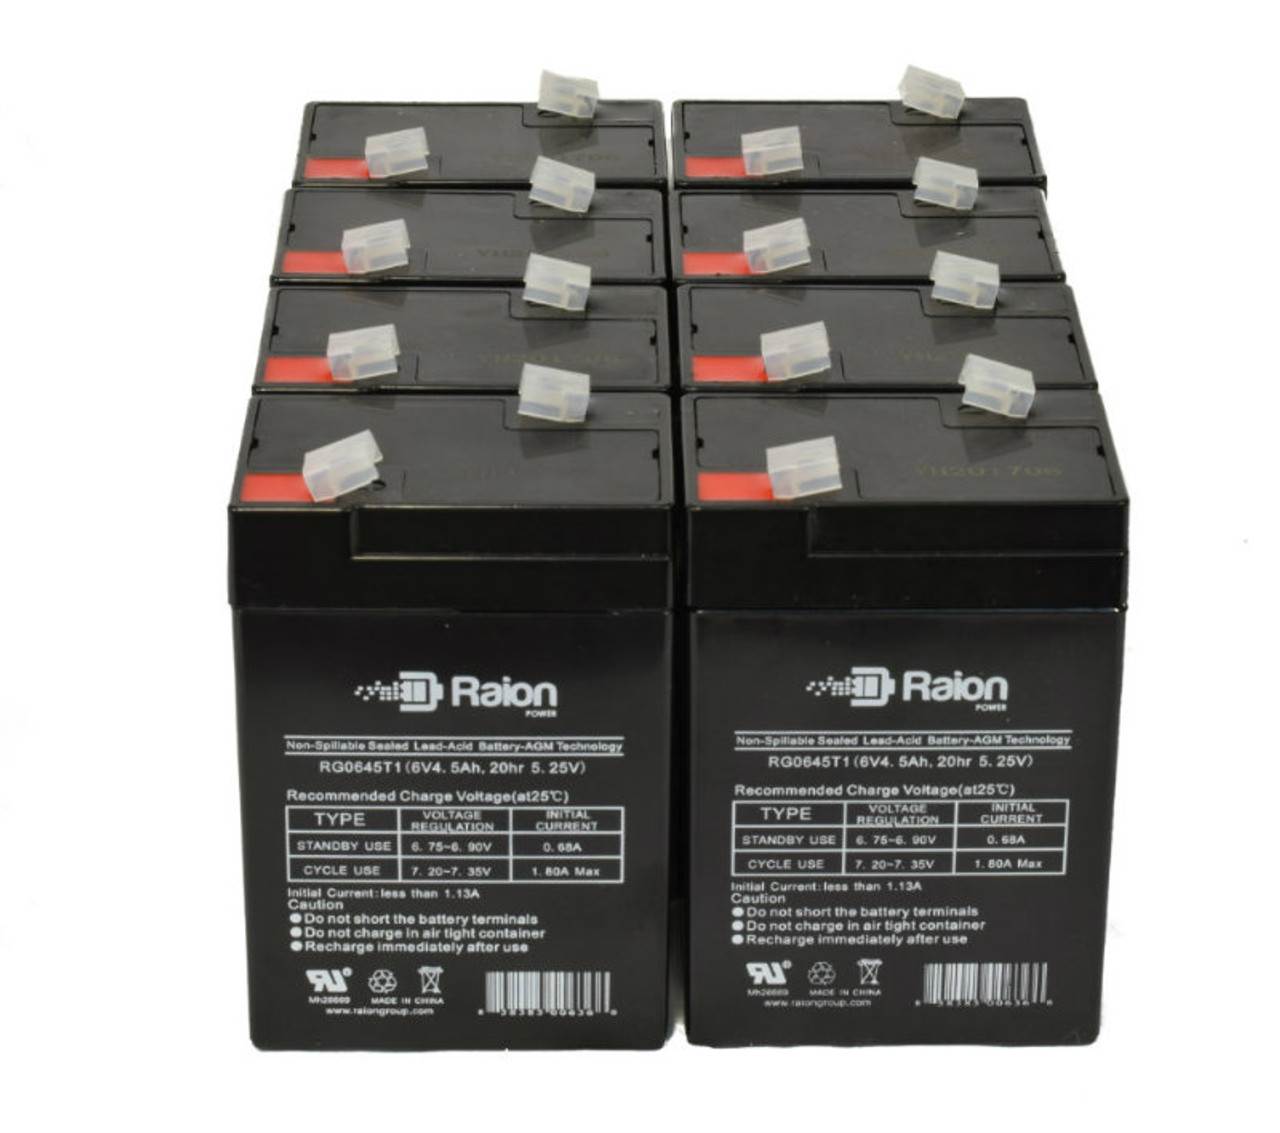 Raion Power 6 Volt 4.5Ah RG0645T1 Replacement Battery for Weiboer GB6-4.2 - 8 Pack